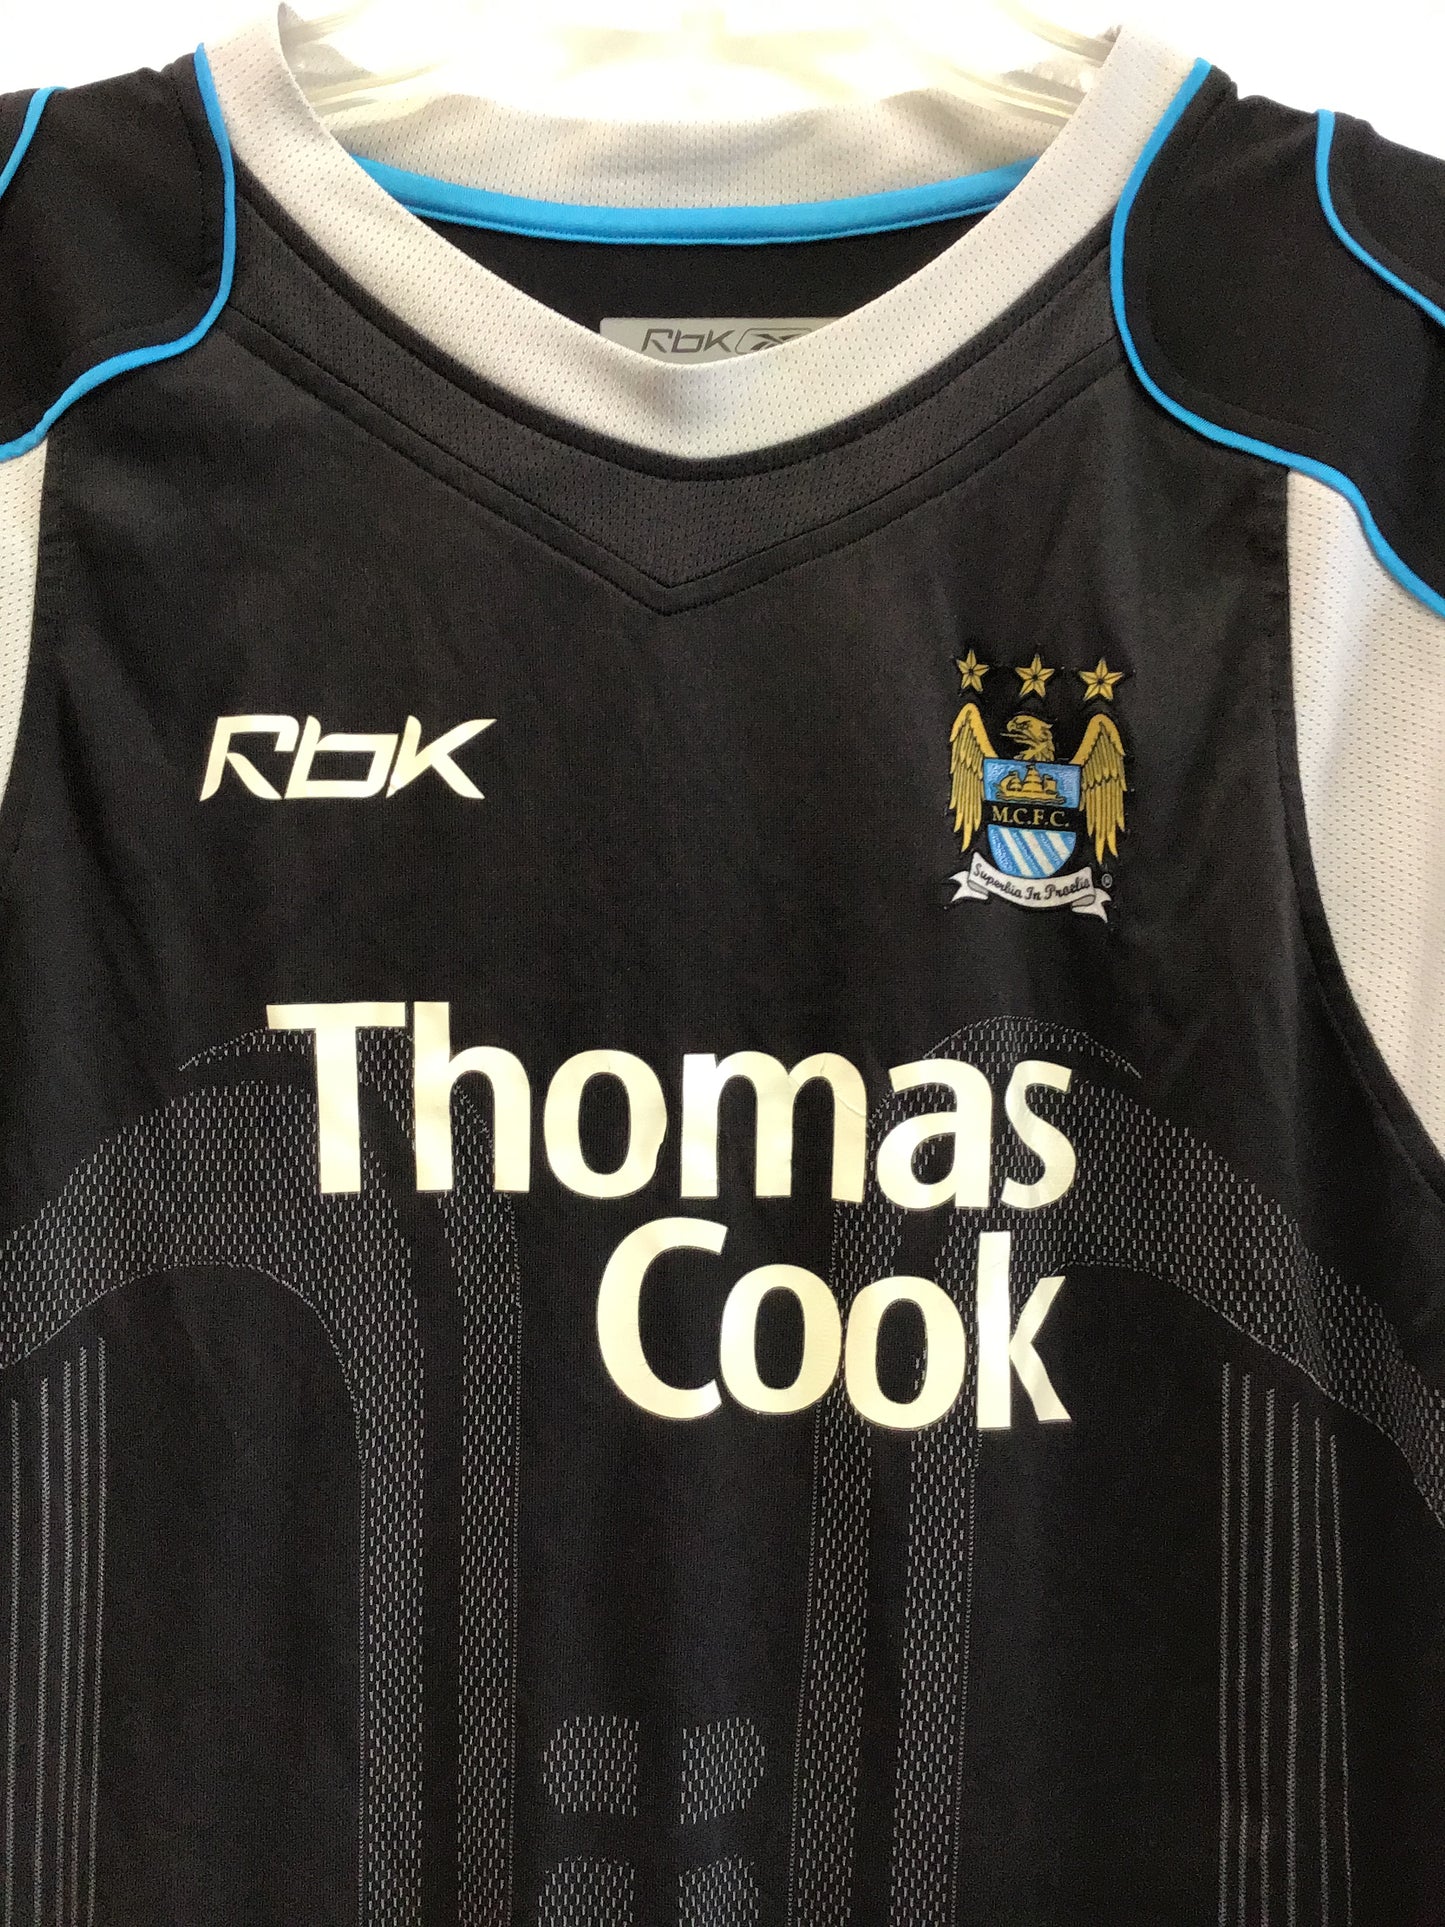 Reebok Manchester City Thomas Cook Authentic Jersey, Size M